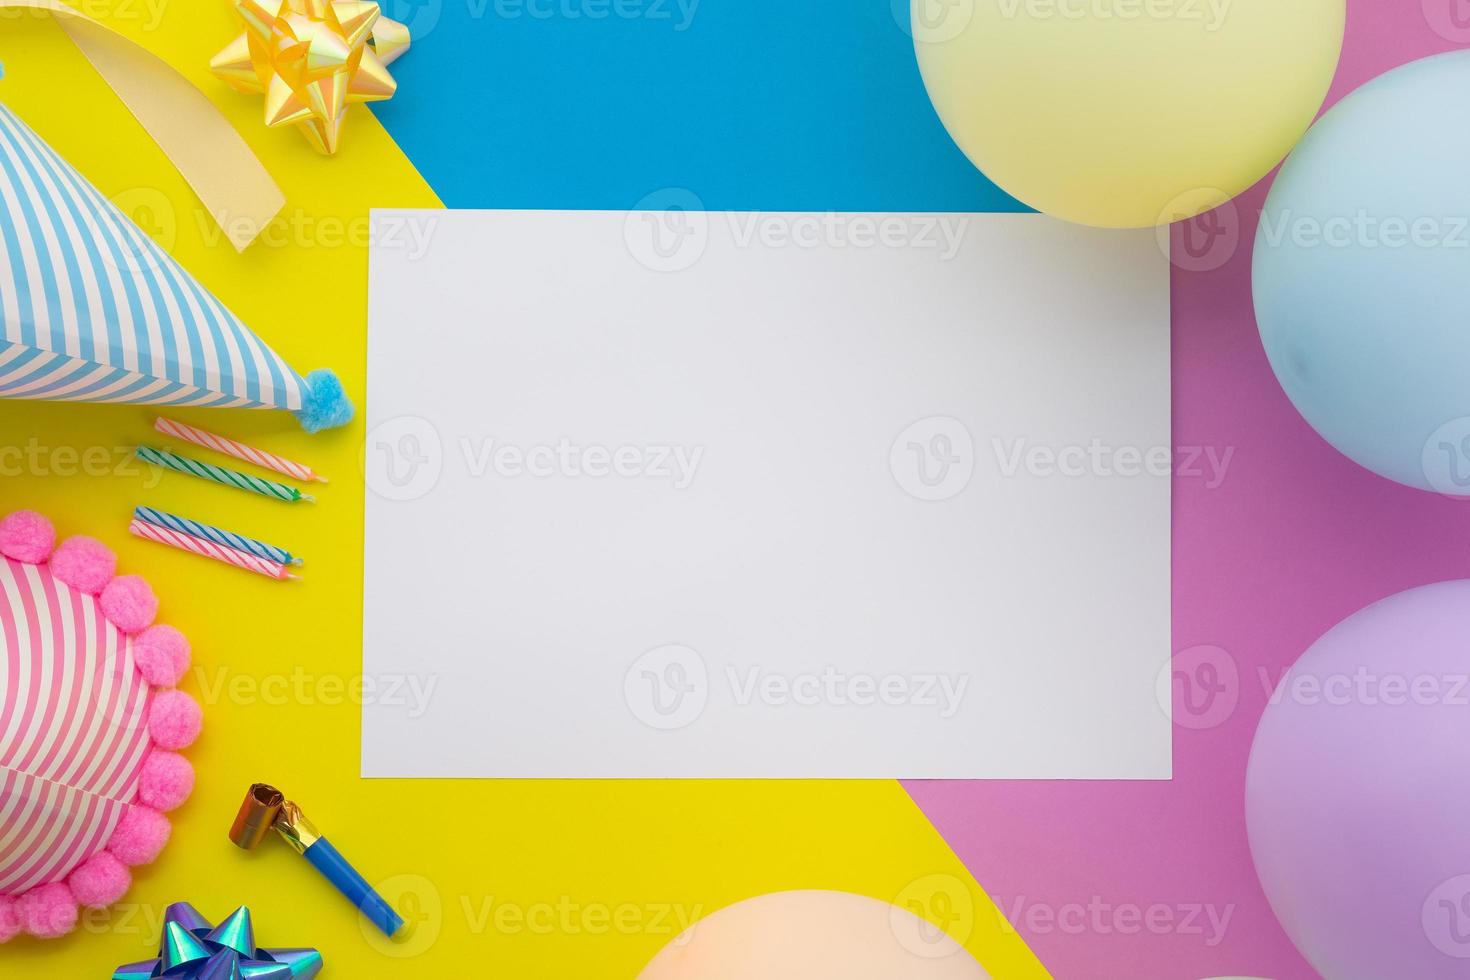 Happy birthday background, Flat lay colorful party decoration with flyer invitation card on pastel yellow, blue and pink geometric background photo